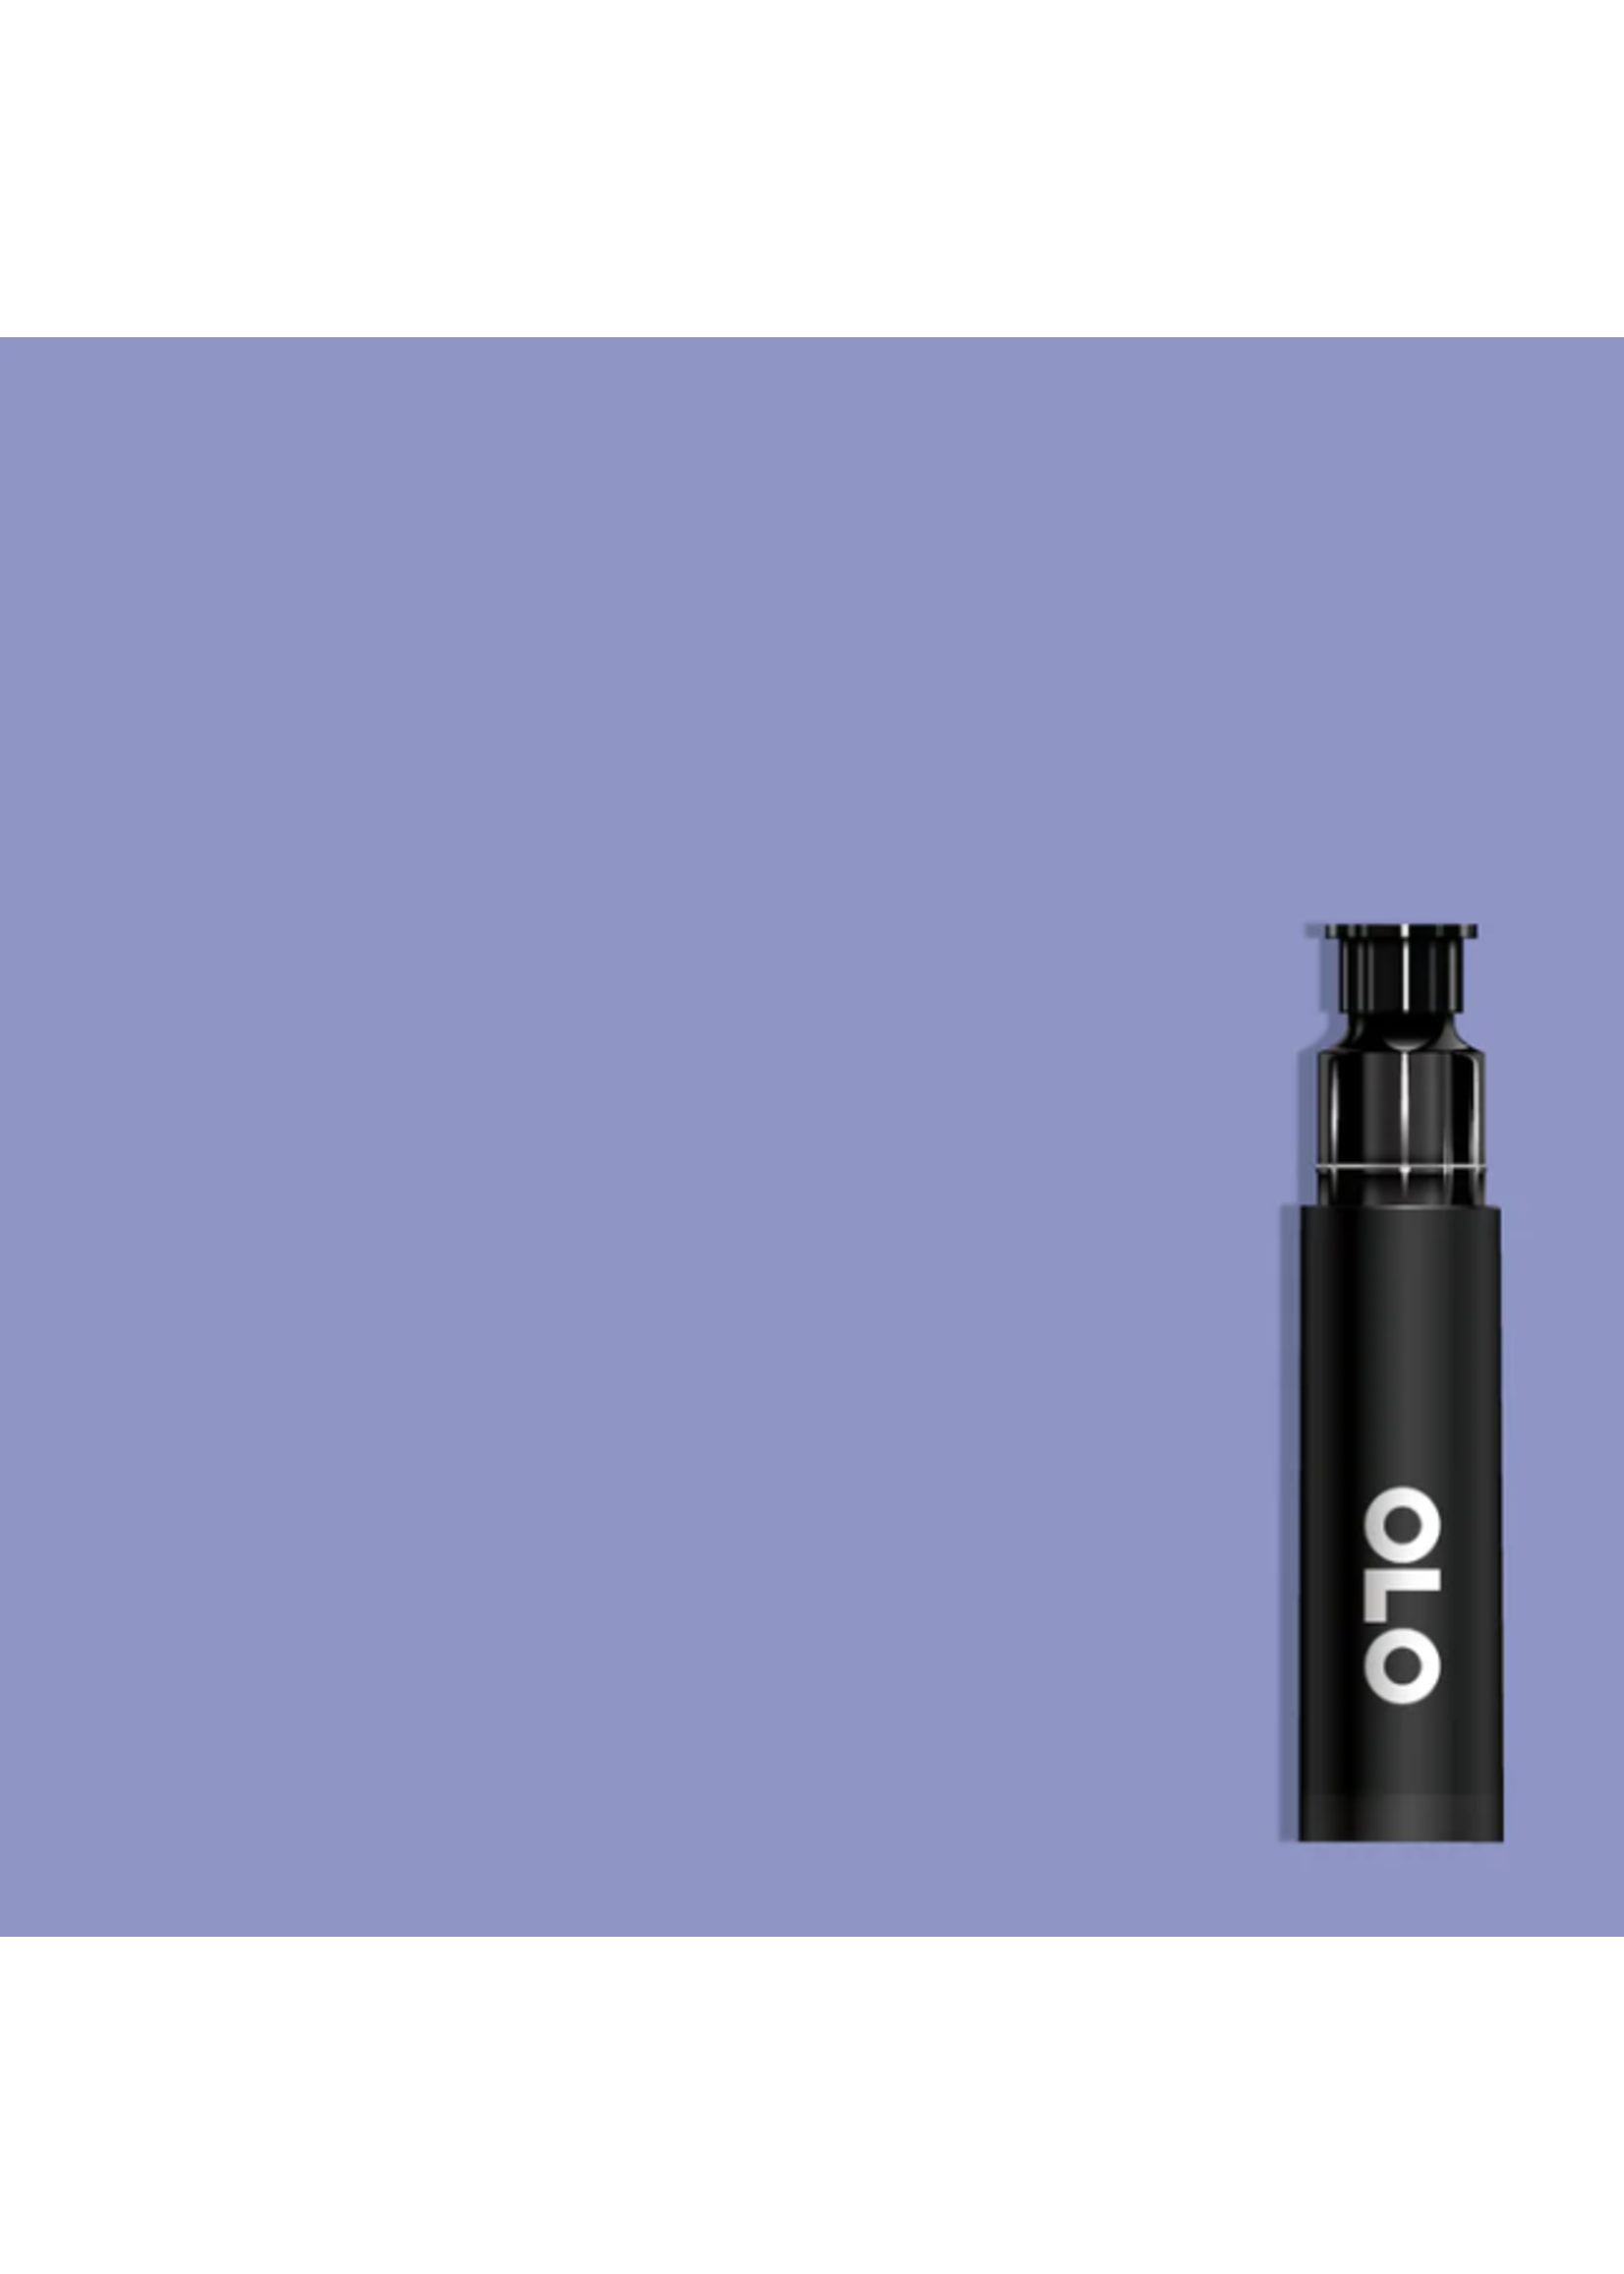 OLO OLO Brush Replacement Cartridge: Periwinkle